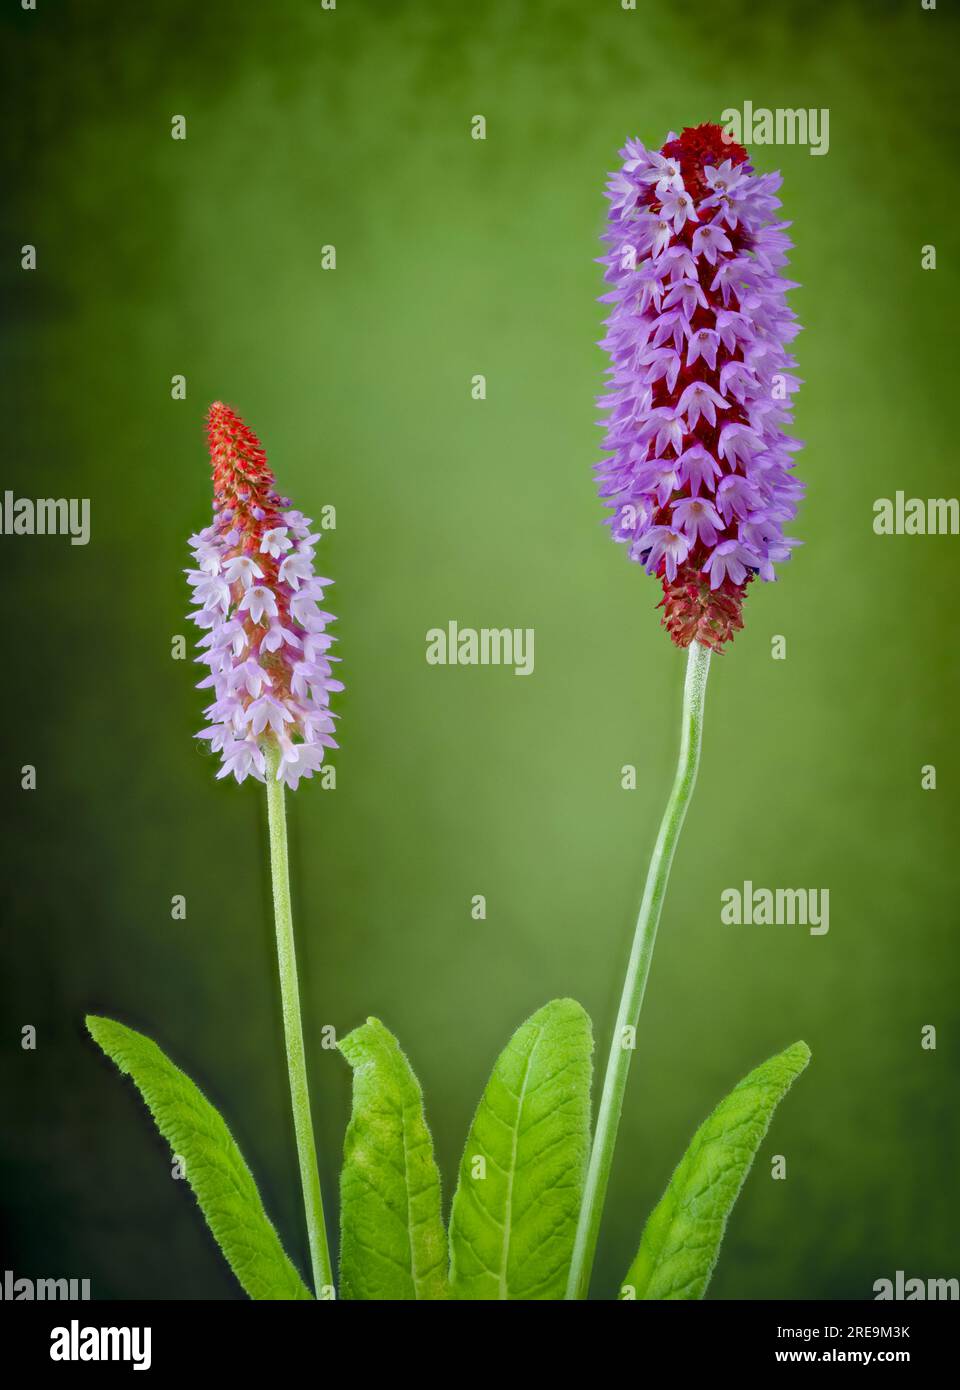 A flowering spike of Primula vialii, which is a Chinese alpine plant that has become popular in the UK, photographed against a plain green background Stock Photo